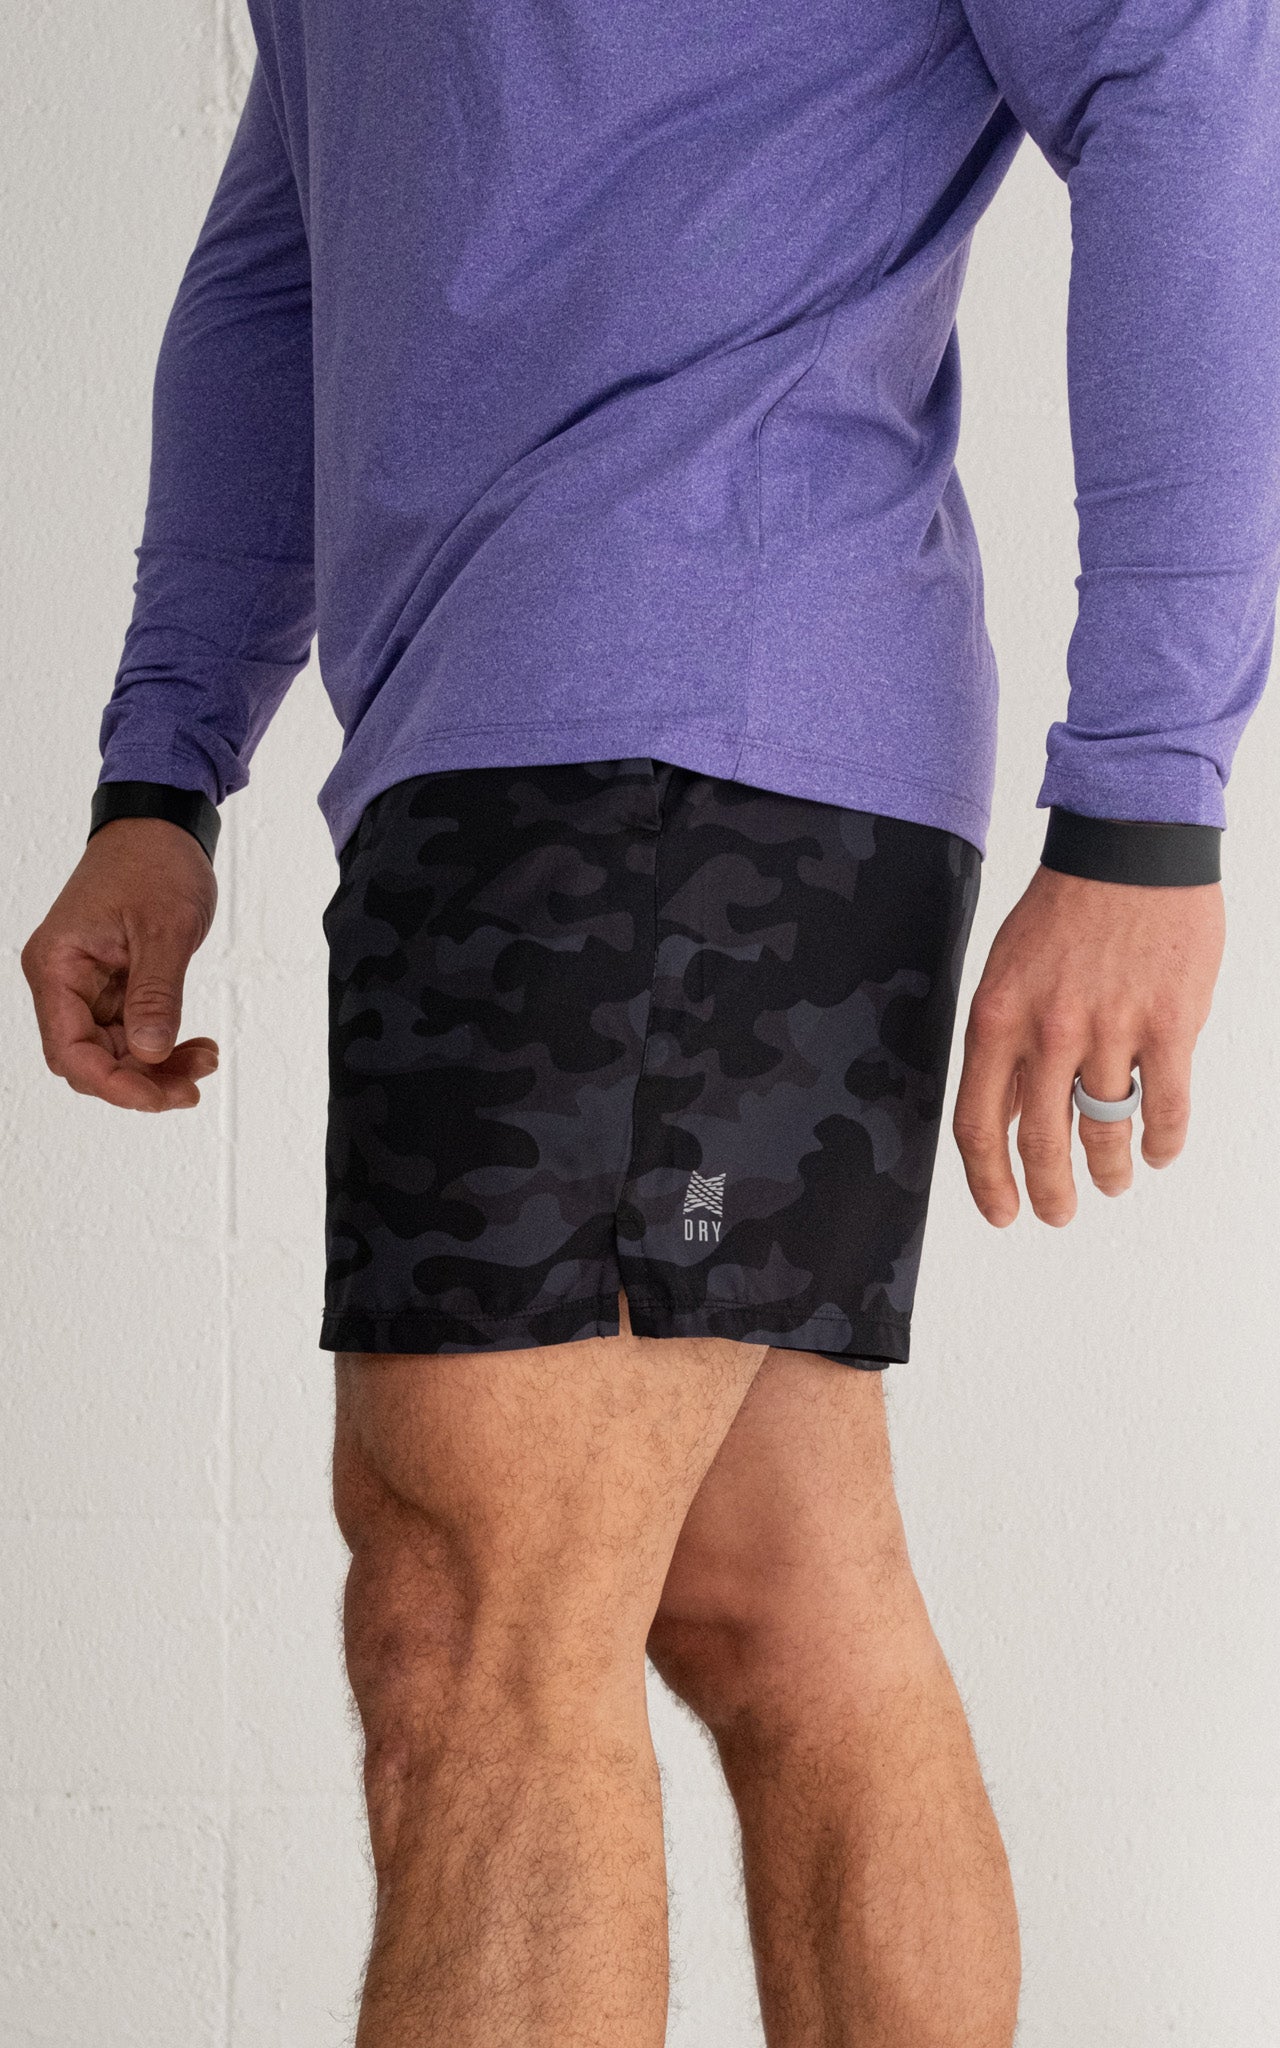 LINED 7" Men's Arena Shorts